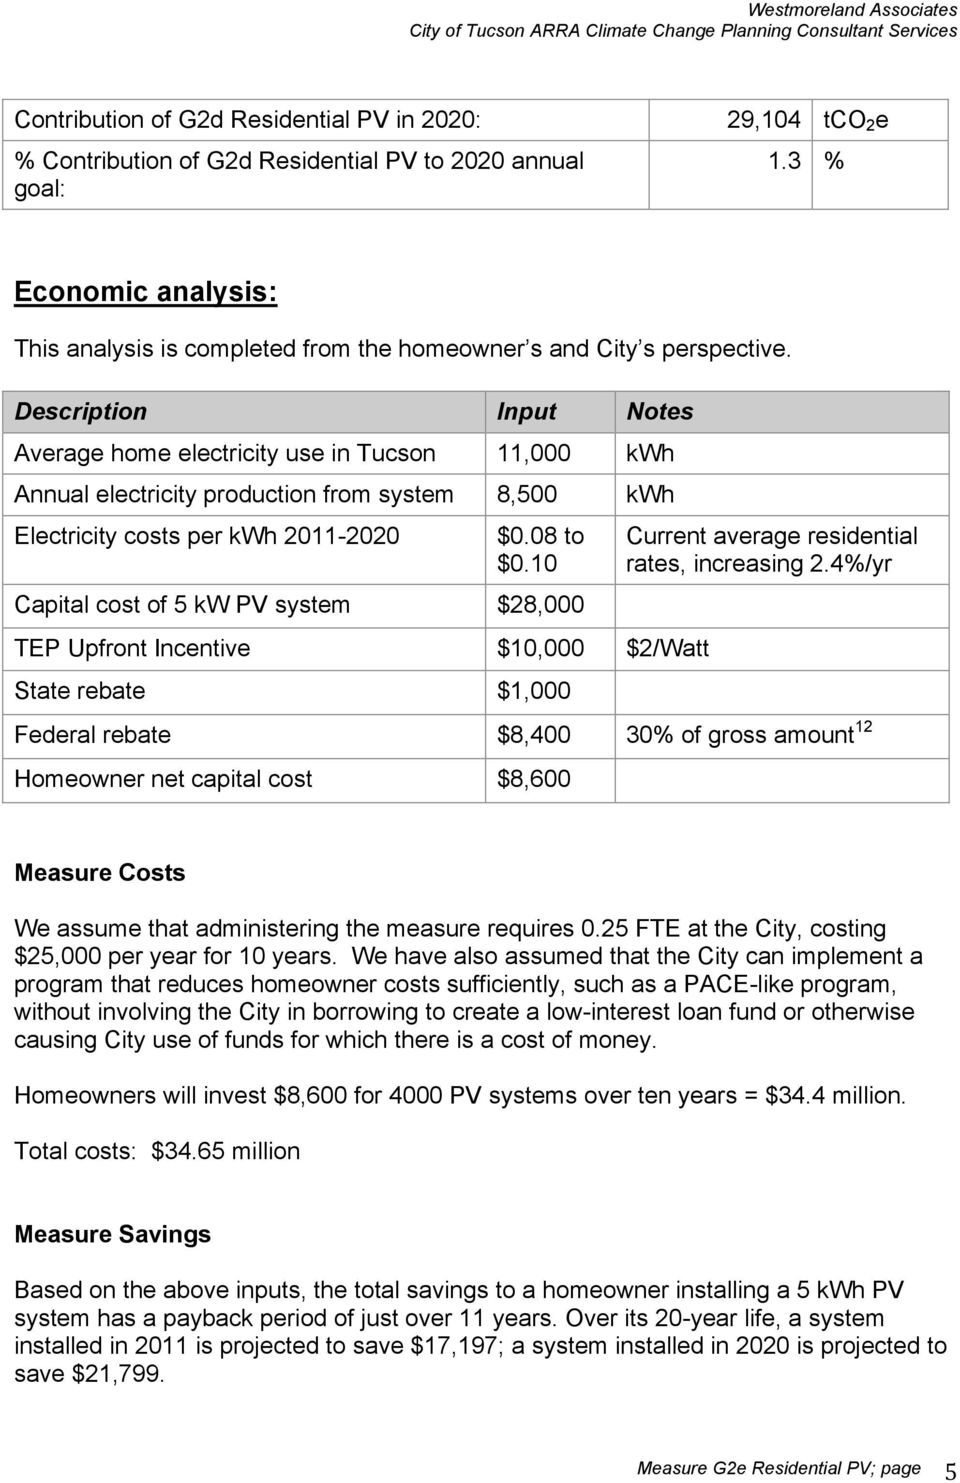 Description Input Notes Average home electricity use in Tucson 11,000 kwh Annual electricity production from system 8,500 kwh Electricity costs per kwh 2011-2020 $0.08 to $0.